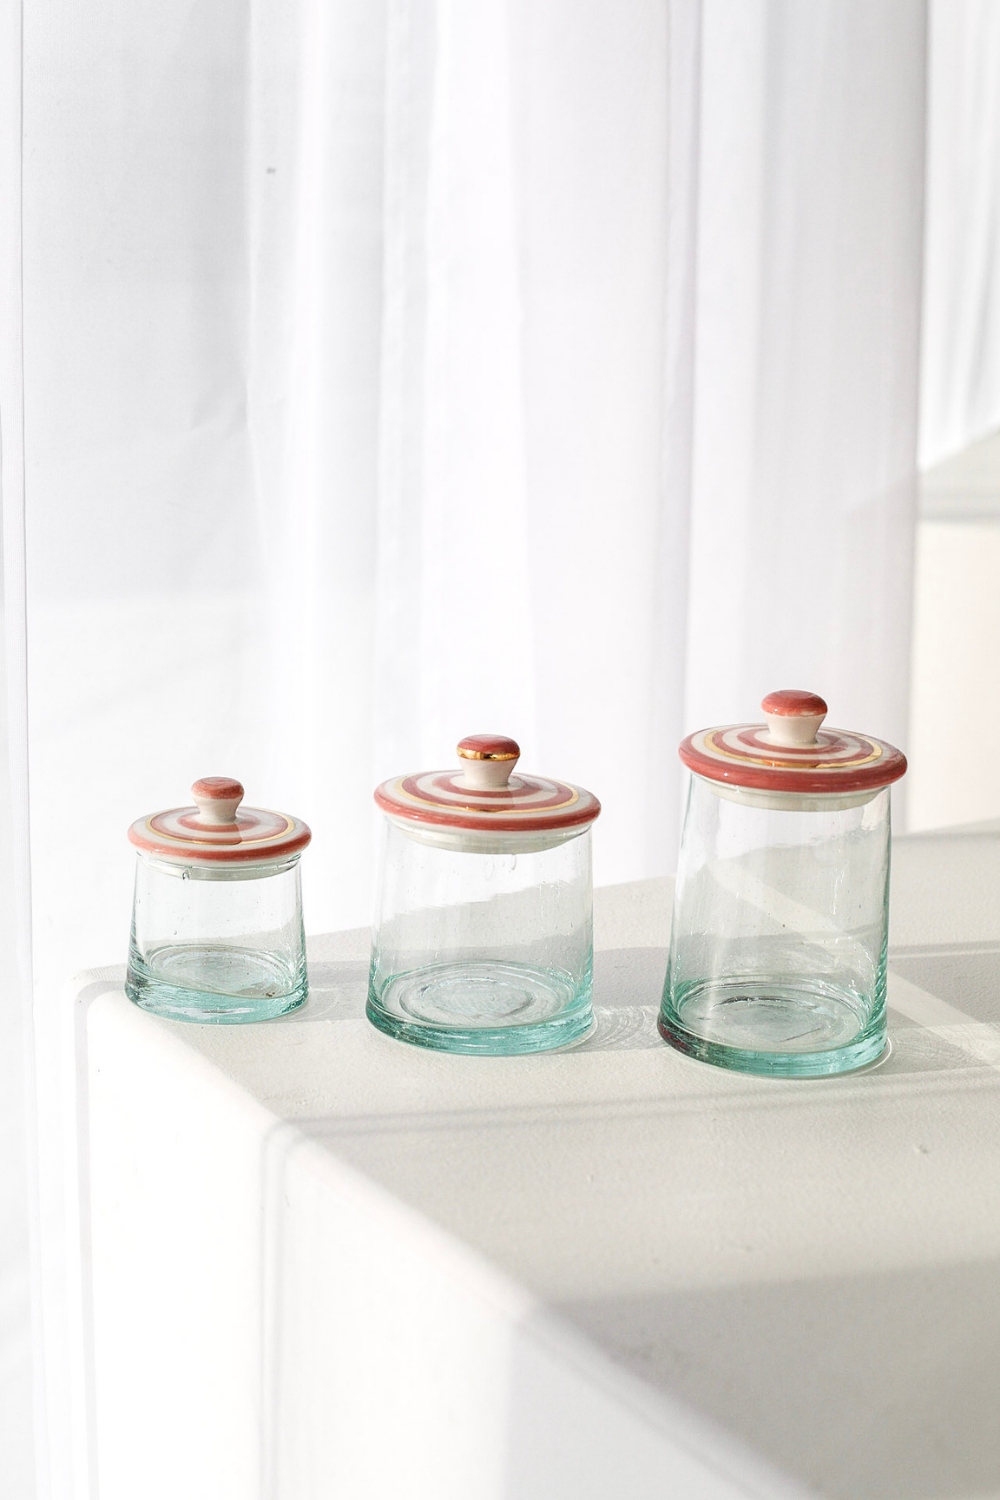 MARRAKECH ROUND GLASS WITH CERAMIC LID STRIPED PINK GOLD - Luxe B Co